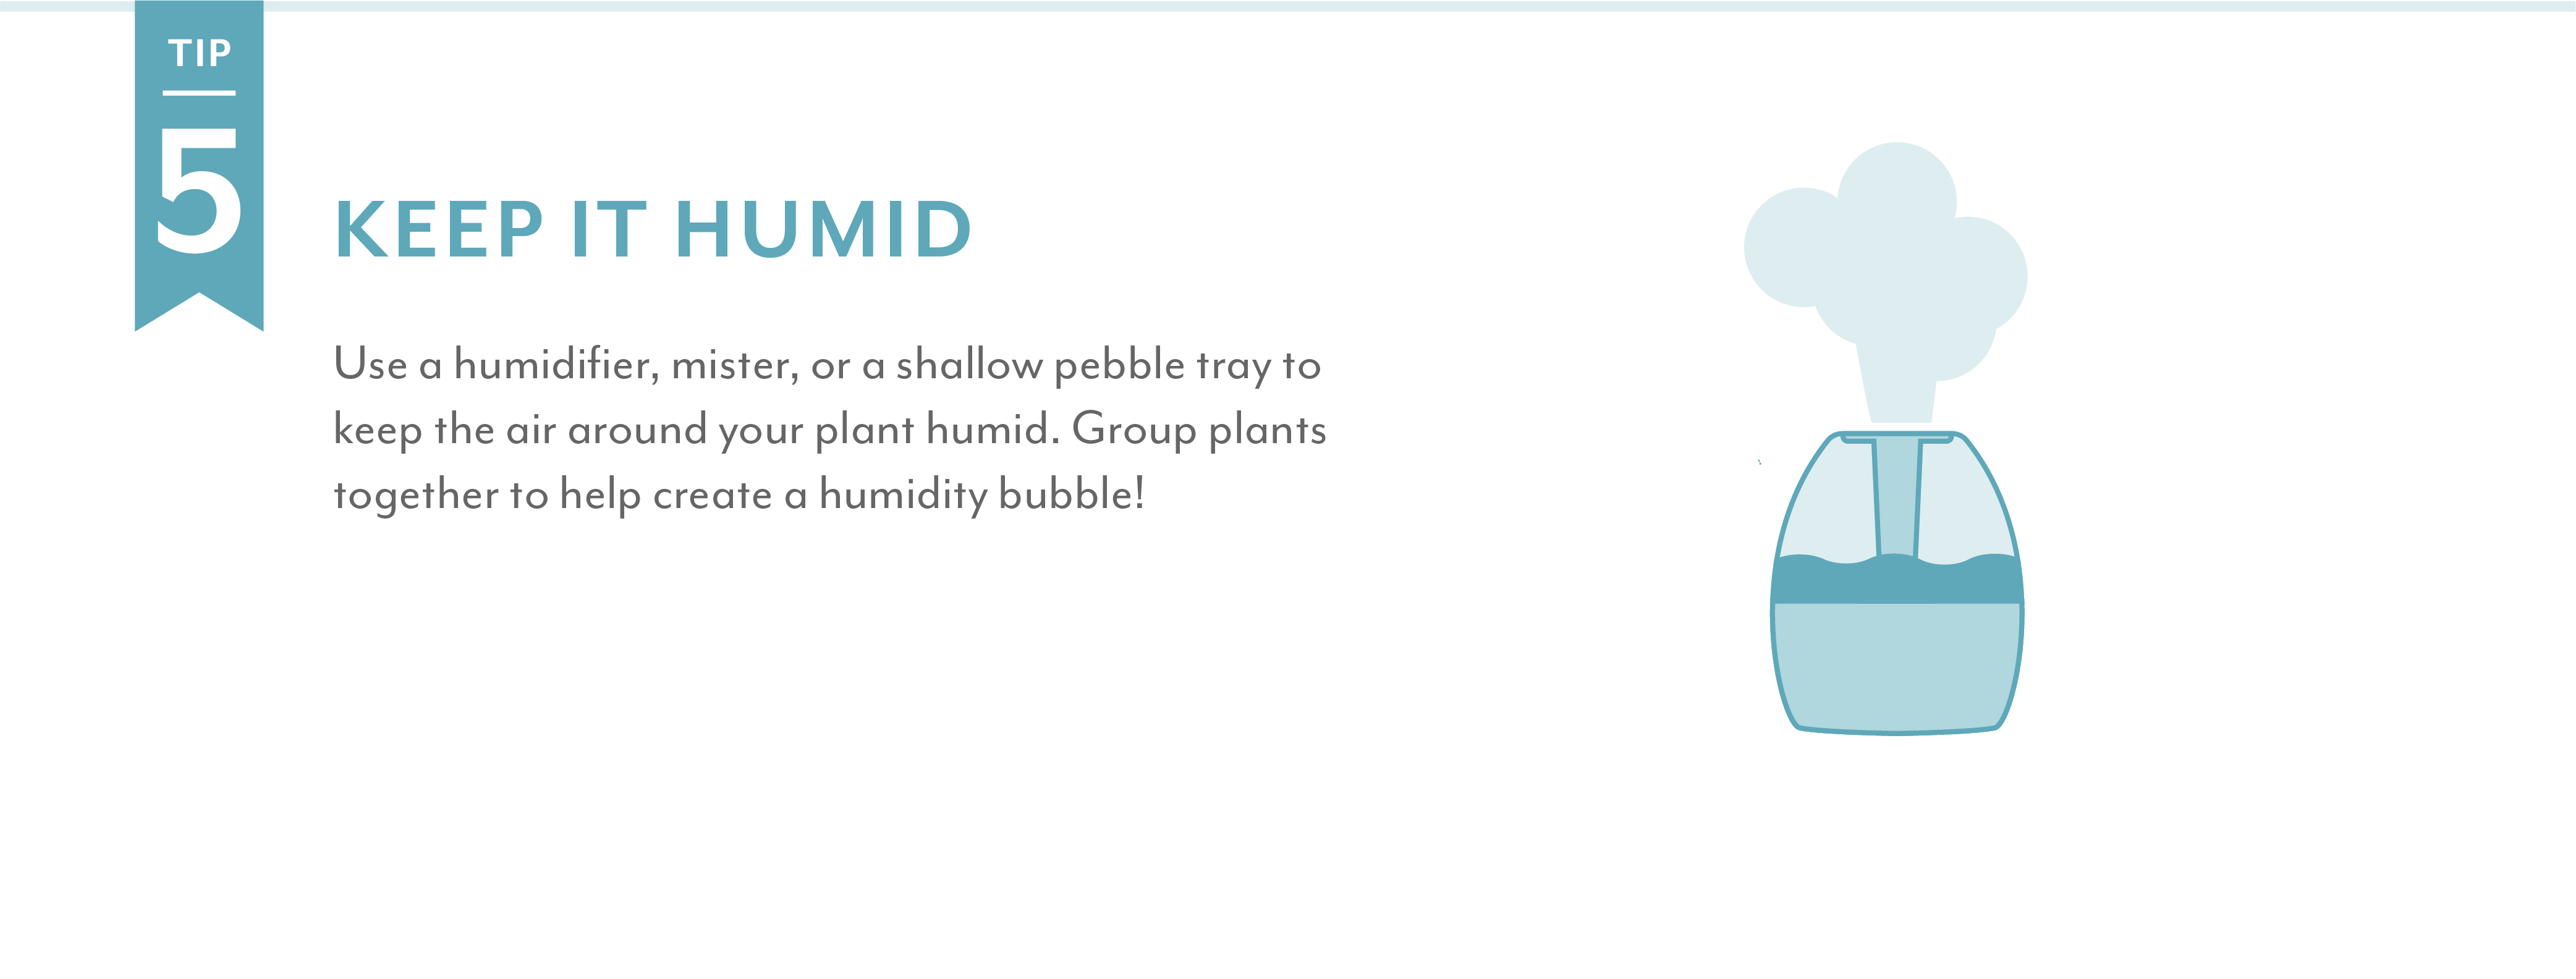 Salisbury Greenhouse | Keep it humid Use a humidifier, mister, or a shallow pebble tray to keep the air around your plant humid. Group plants together to help create a humidity bubble!